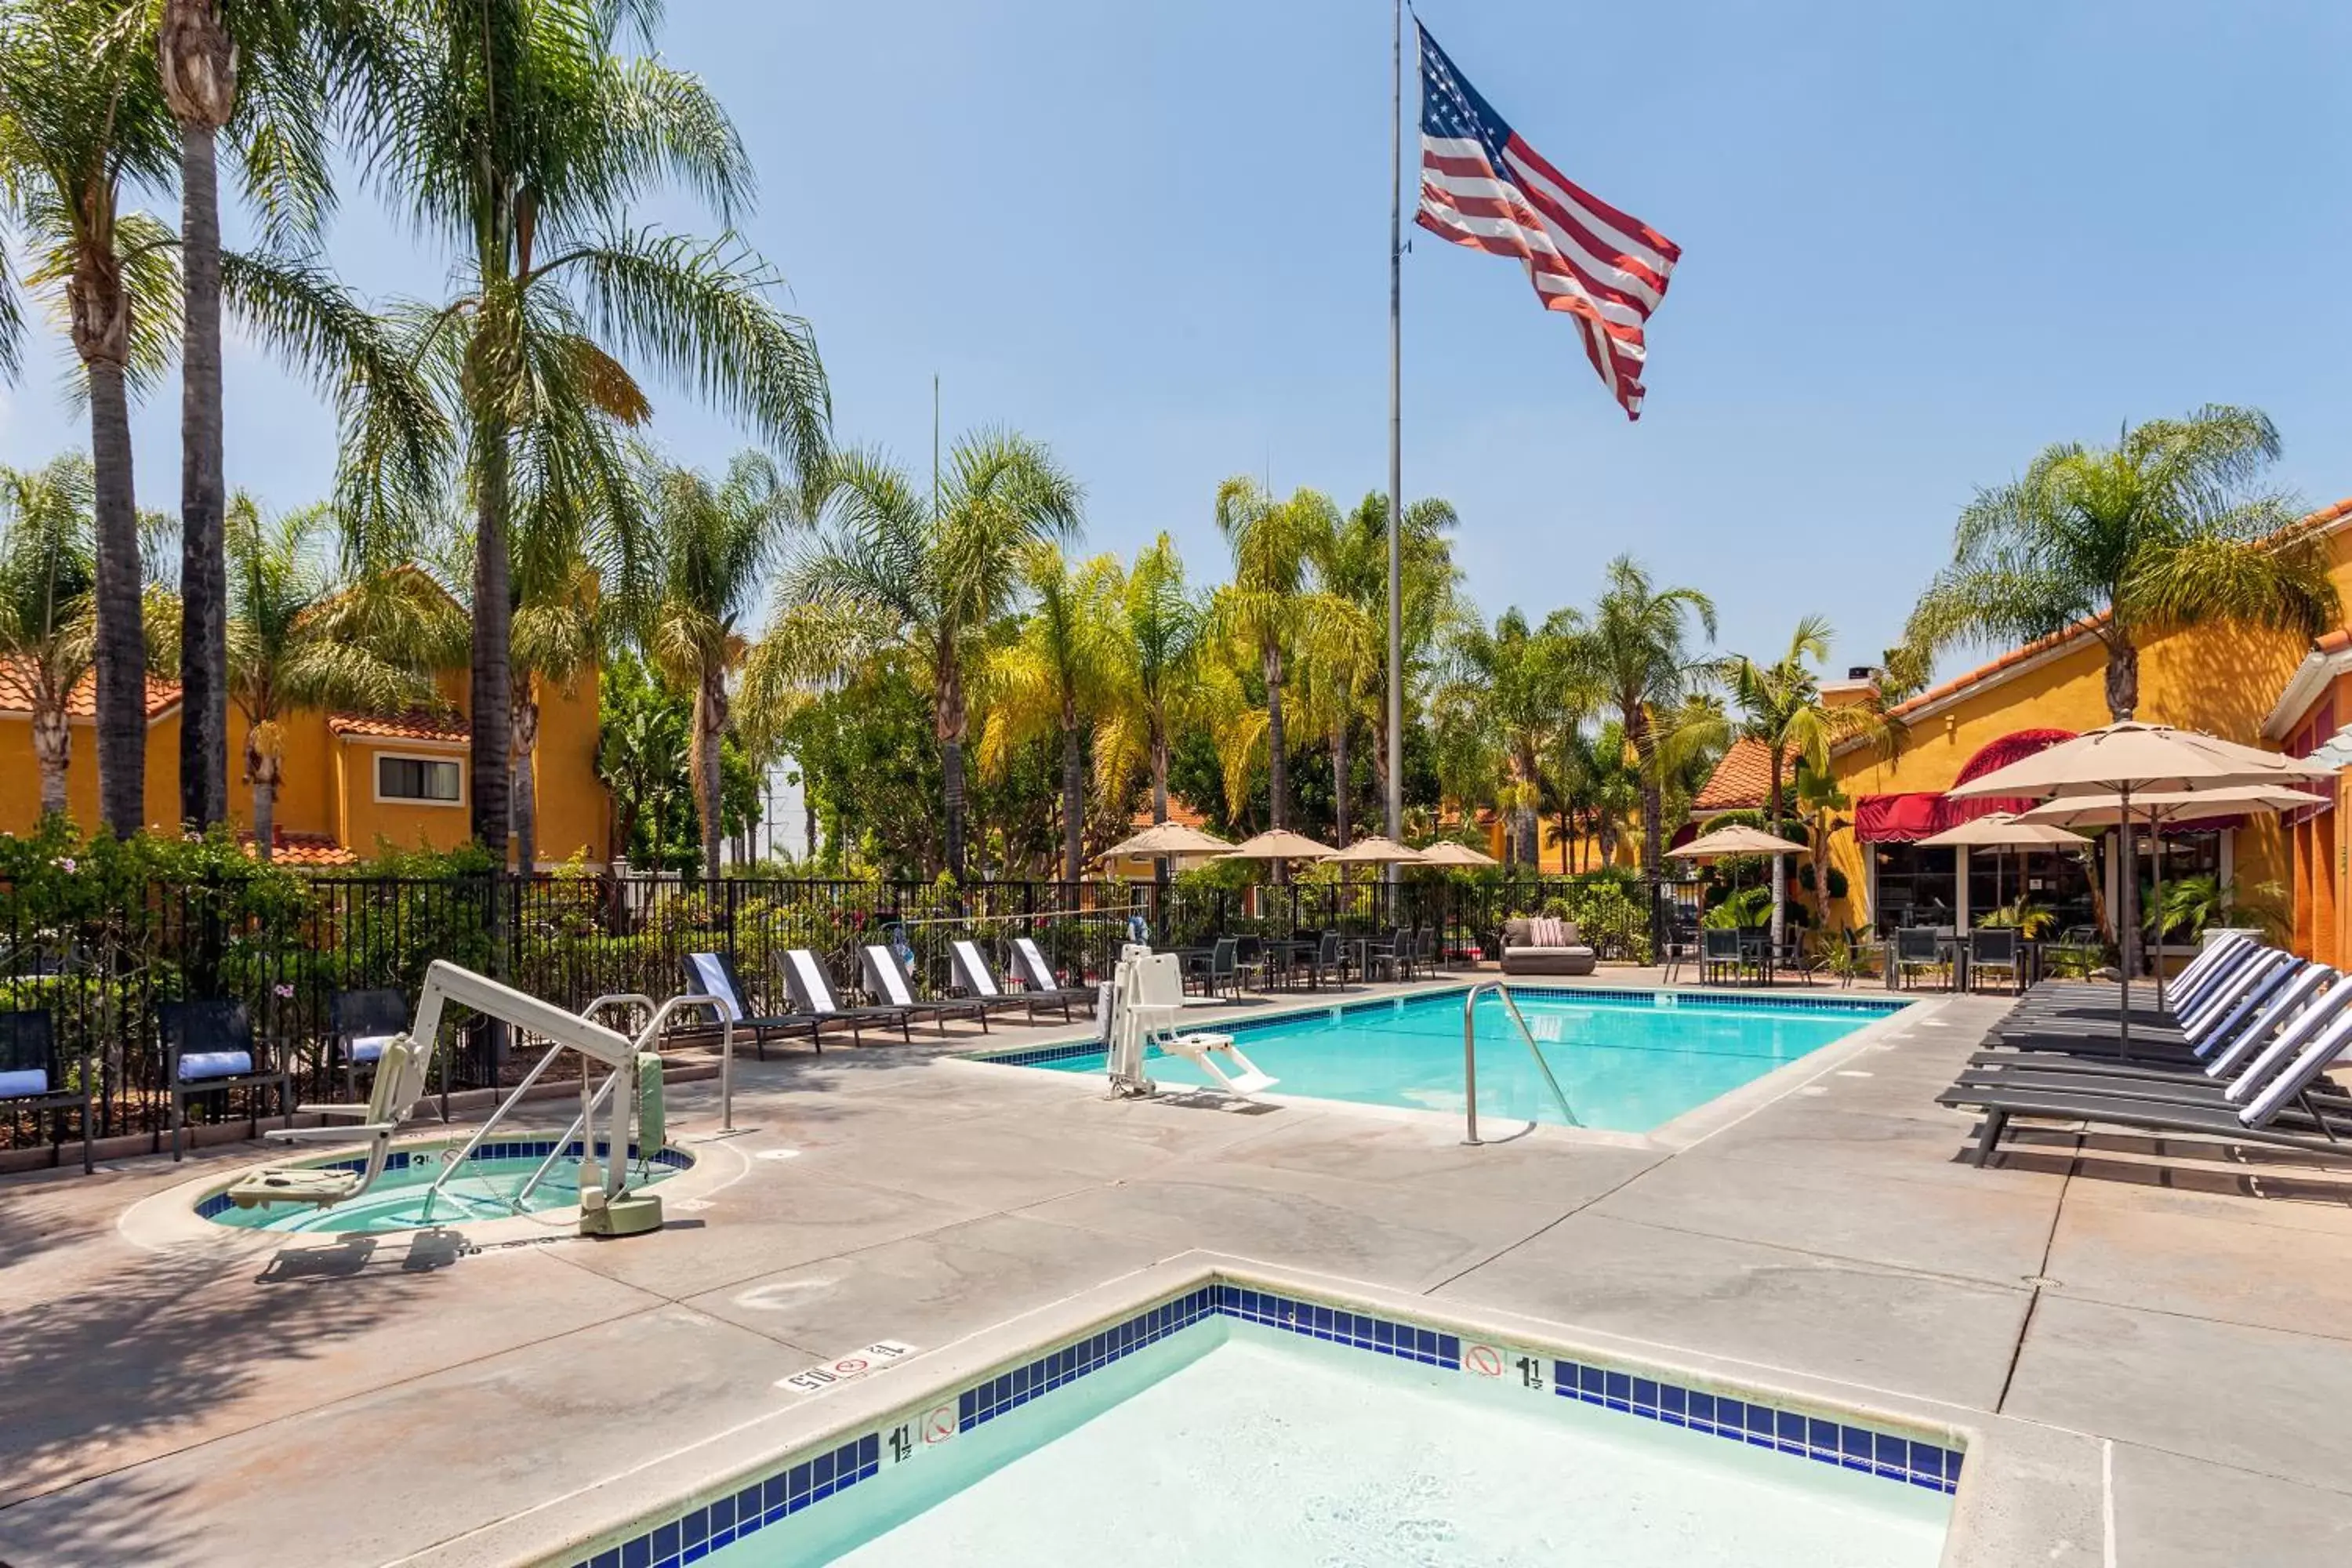 Swimming Pool in Clementine Hotel & Suites Anaheim